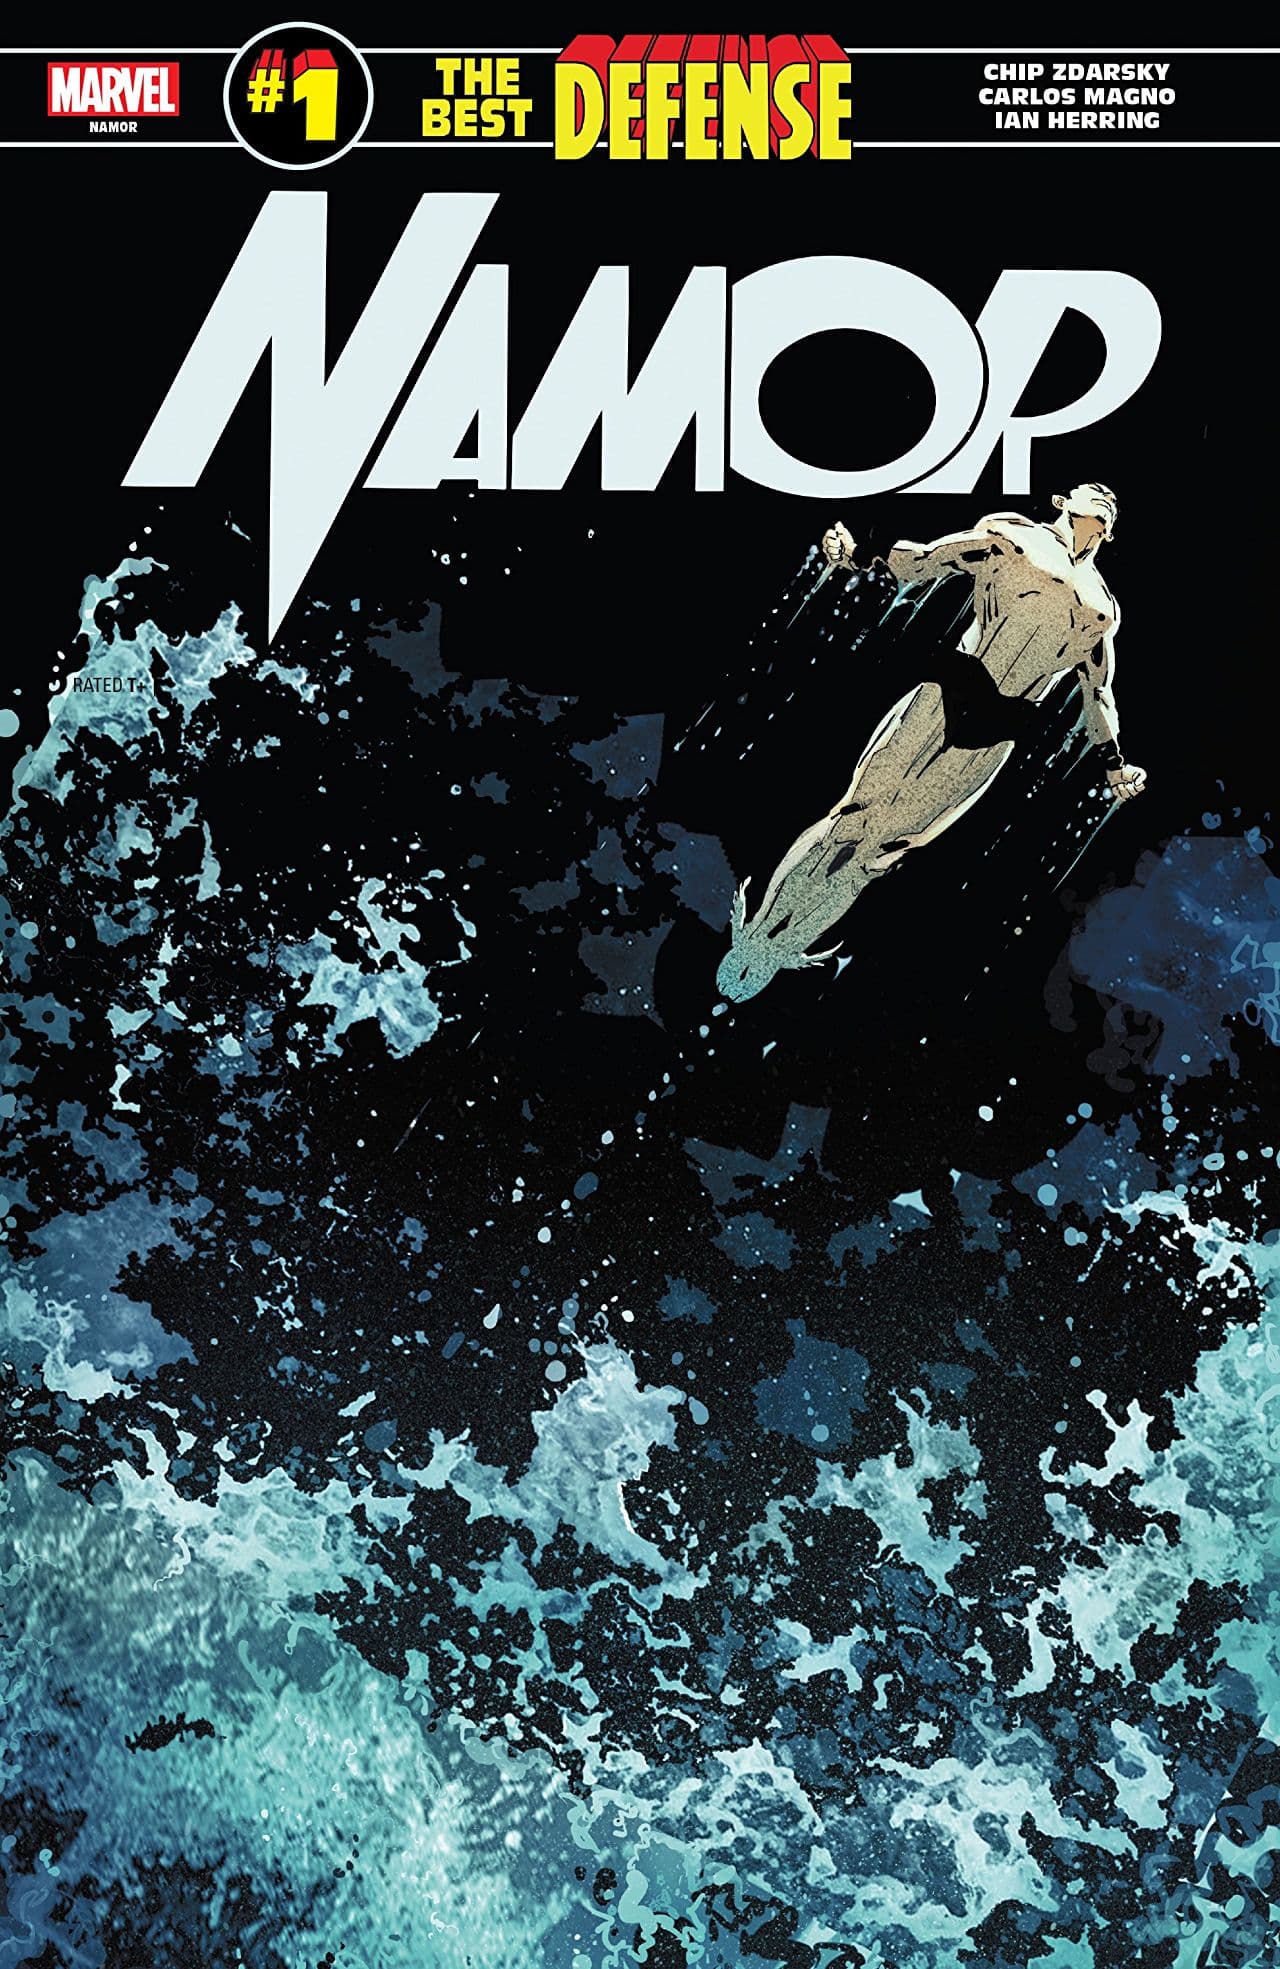 Namor: The Best Defense #1cover by Ron Garney